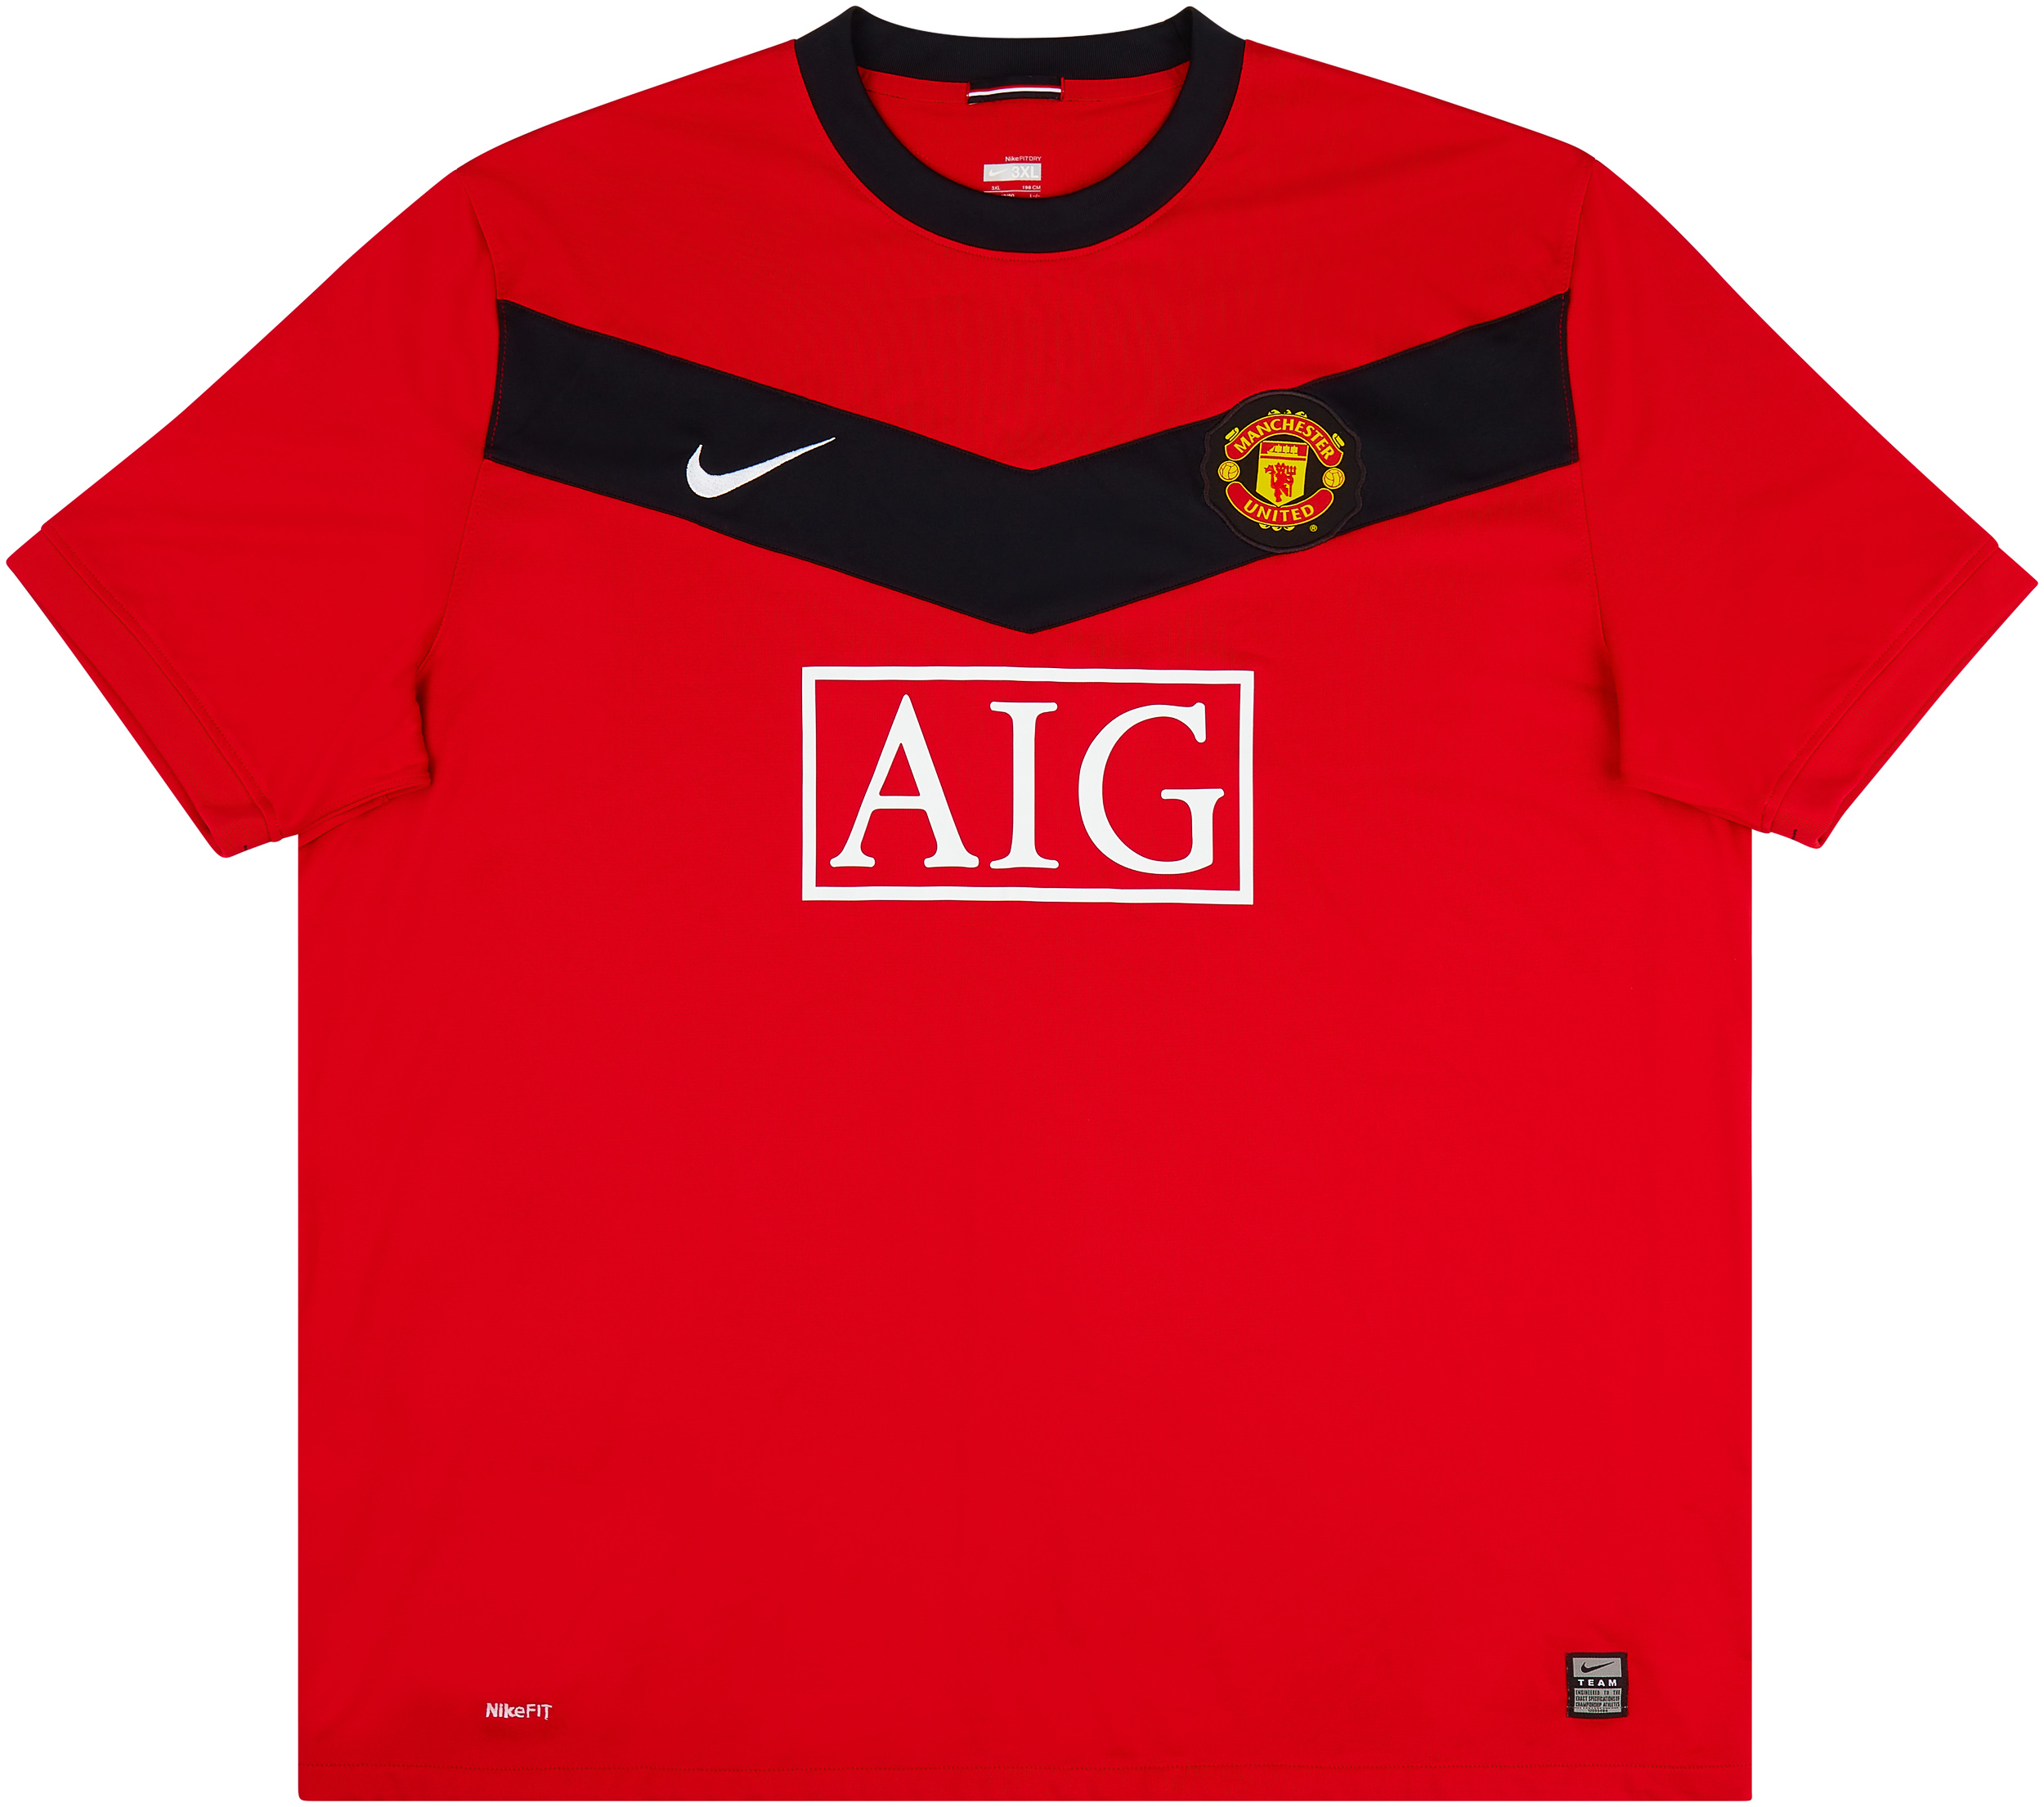 2009-10 Manchester United Home Shirt - 10/10 - ()